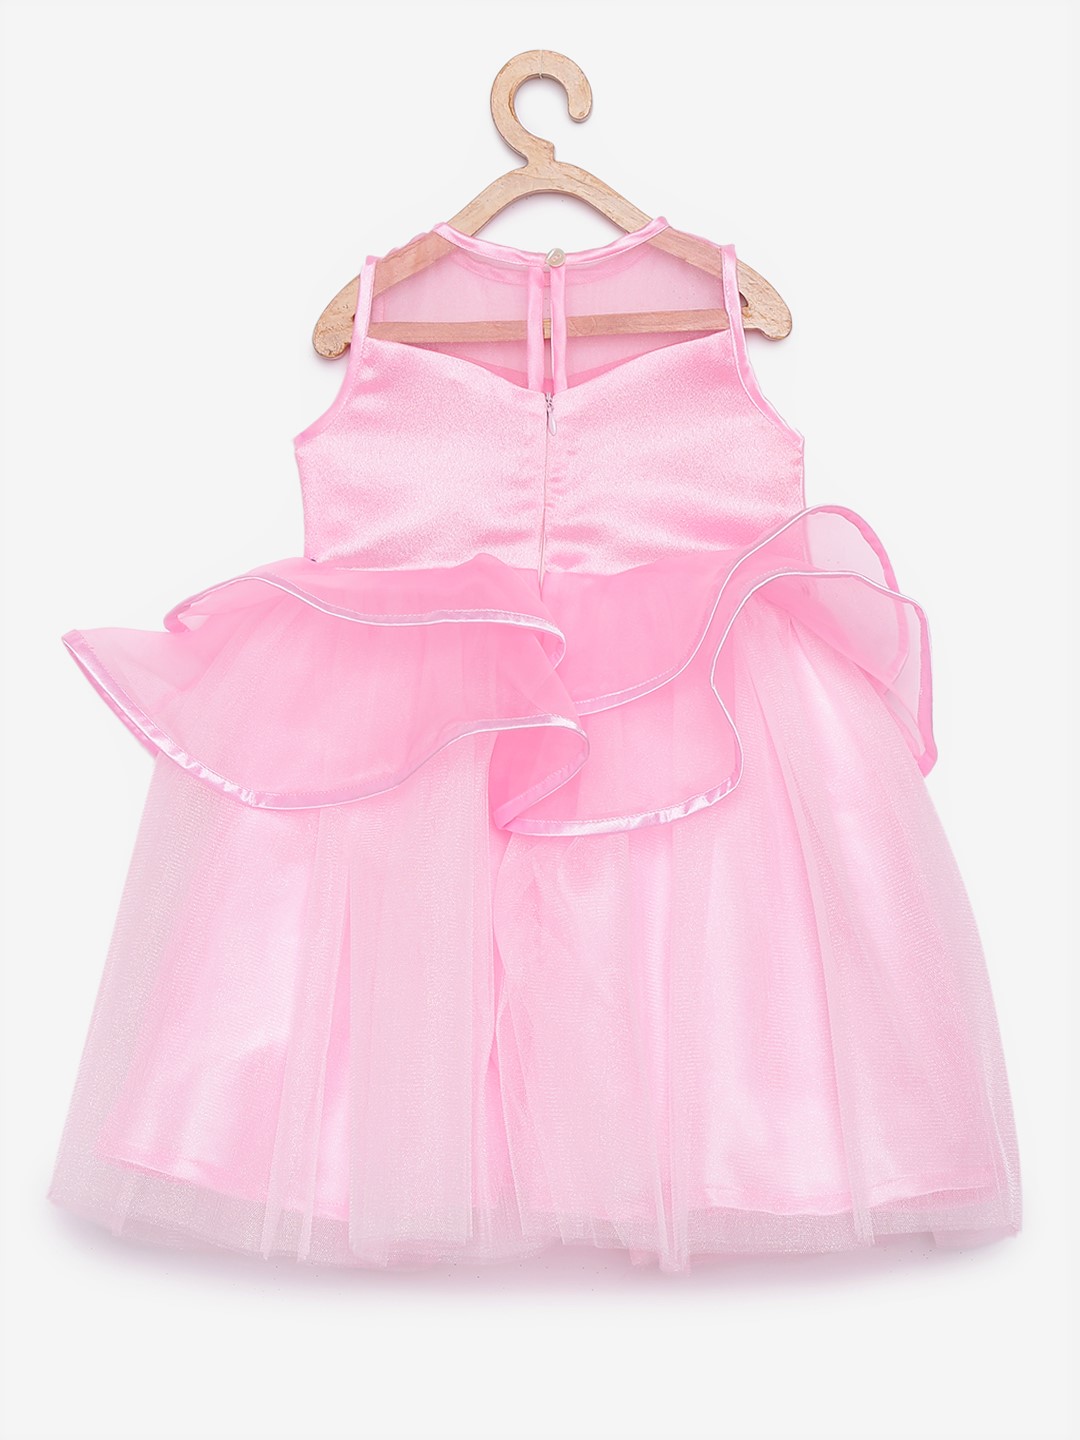 2 Little Sister Pink Ruffle Gown